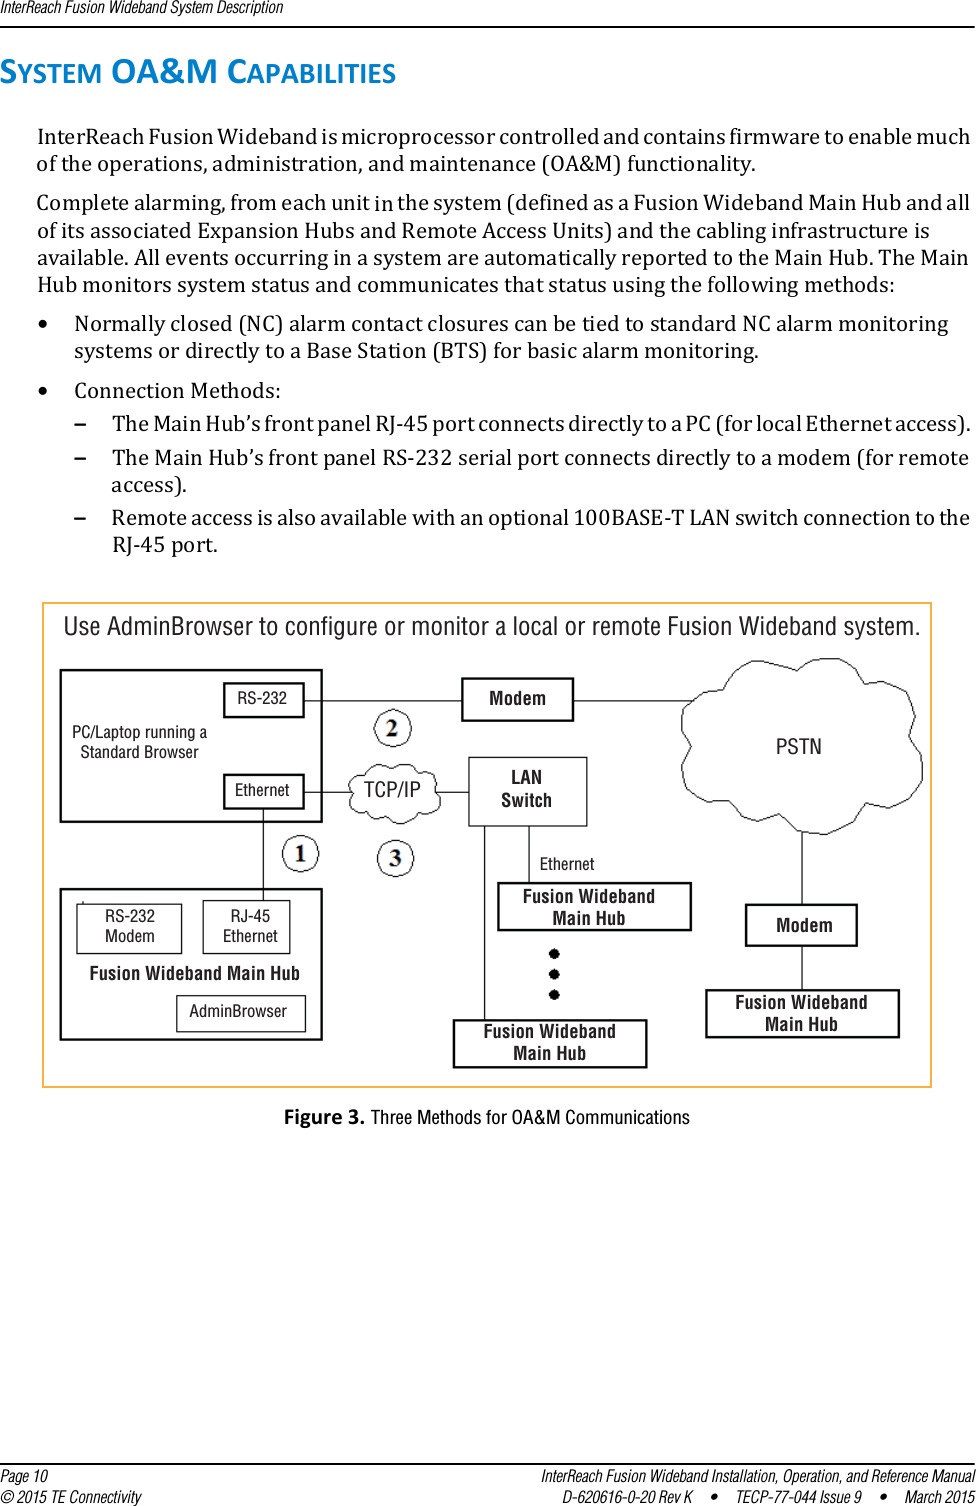 InterReach Fusion Wideband System Description  Page 10 InterReach Fusion Wideband Installation, Operation, and Reference Manual© 2015 TE Connectivity D-620616-0-20 Rev K  •  TECP-77-044 Issue 9  •  March 2015SYSTEM OA&amp;M CAPABILITIES InterReach Fusion Wideband is microprocessor controlled and contains firmware to enable much of the operations, administration, and maintenance (OA&amp;M) functionality.Complete alarming, from each unit in the system (defined as a Fusion Wideband Main Hub and all of its associated Expansion Hubs and Remote Access Units) and the cabling infrastructure is available. All events occurring in a system are automatically reported to the Main Hub. The Main Hub monitors system status and communicates that status using the following methods:•Normally closed (NC) alarm contact closures can be tied to standard NC alarm monitoring systems or directly to a Base Station (BTS) for basic alarm monitoring.•Connection Methods:–The Main Hub’s front panel RJ-45 port connects directly to a PC (for local Ethernet access). –The Main Hub’s front panel RS-232 serial port connects directly to a modem (for remote access). –Remote access is also available with an optional 100BASE-T LAN switch connection to the RJ-45 port.Figure 3. Three Methods for OA&amp;M CommunicationsRS-232 ModemLANSwitchEthernet TCP/IPRS-232ModemRJ-45EthernetAdminBrowserEthernetFusion WidebandMain Hub ModemFusion Wideband Main HubPSTNUse AdminBrowser to configure or monitor a local or remote Fusion Wideband system.PC/Laptop running aStandard BrowserFusion WidebandMain HubFusion WidebandMain Hub